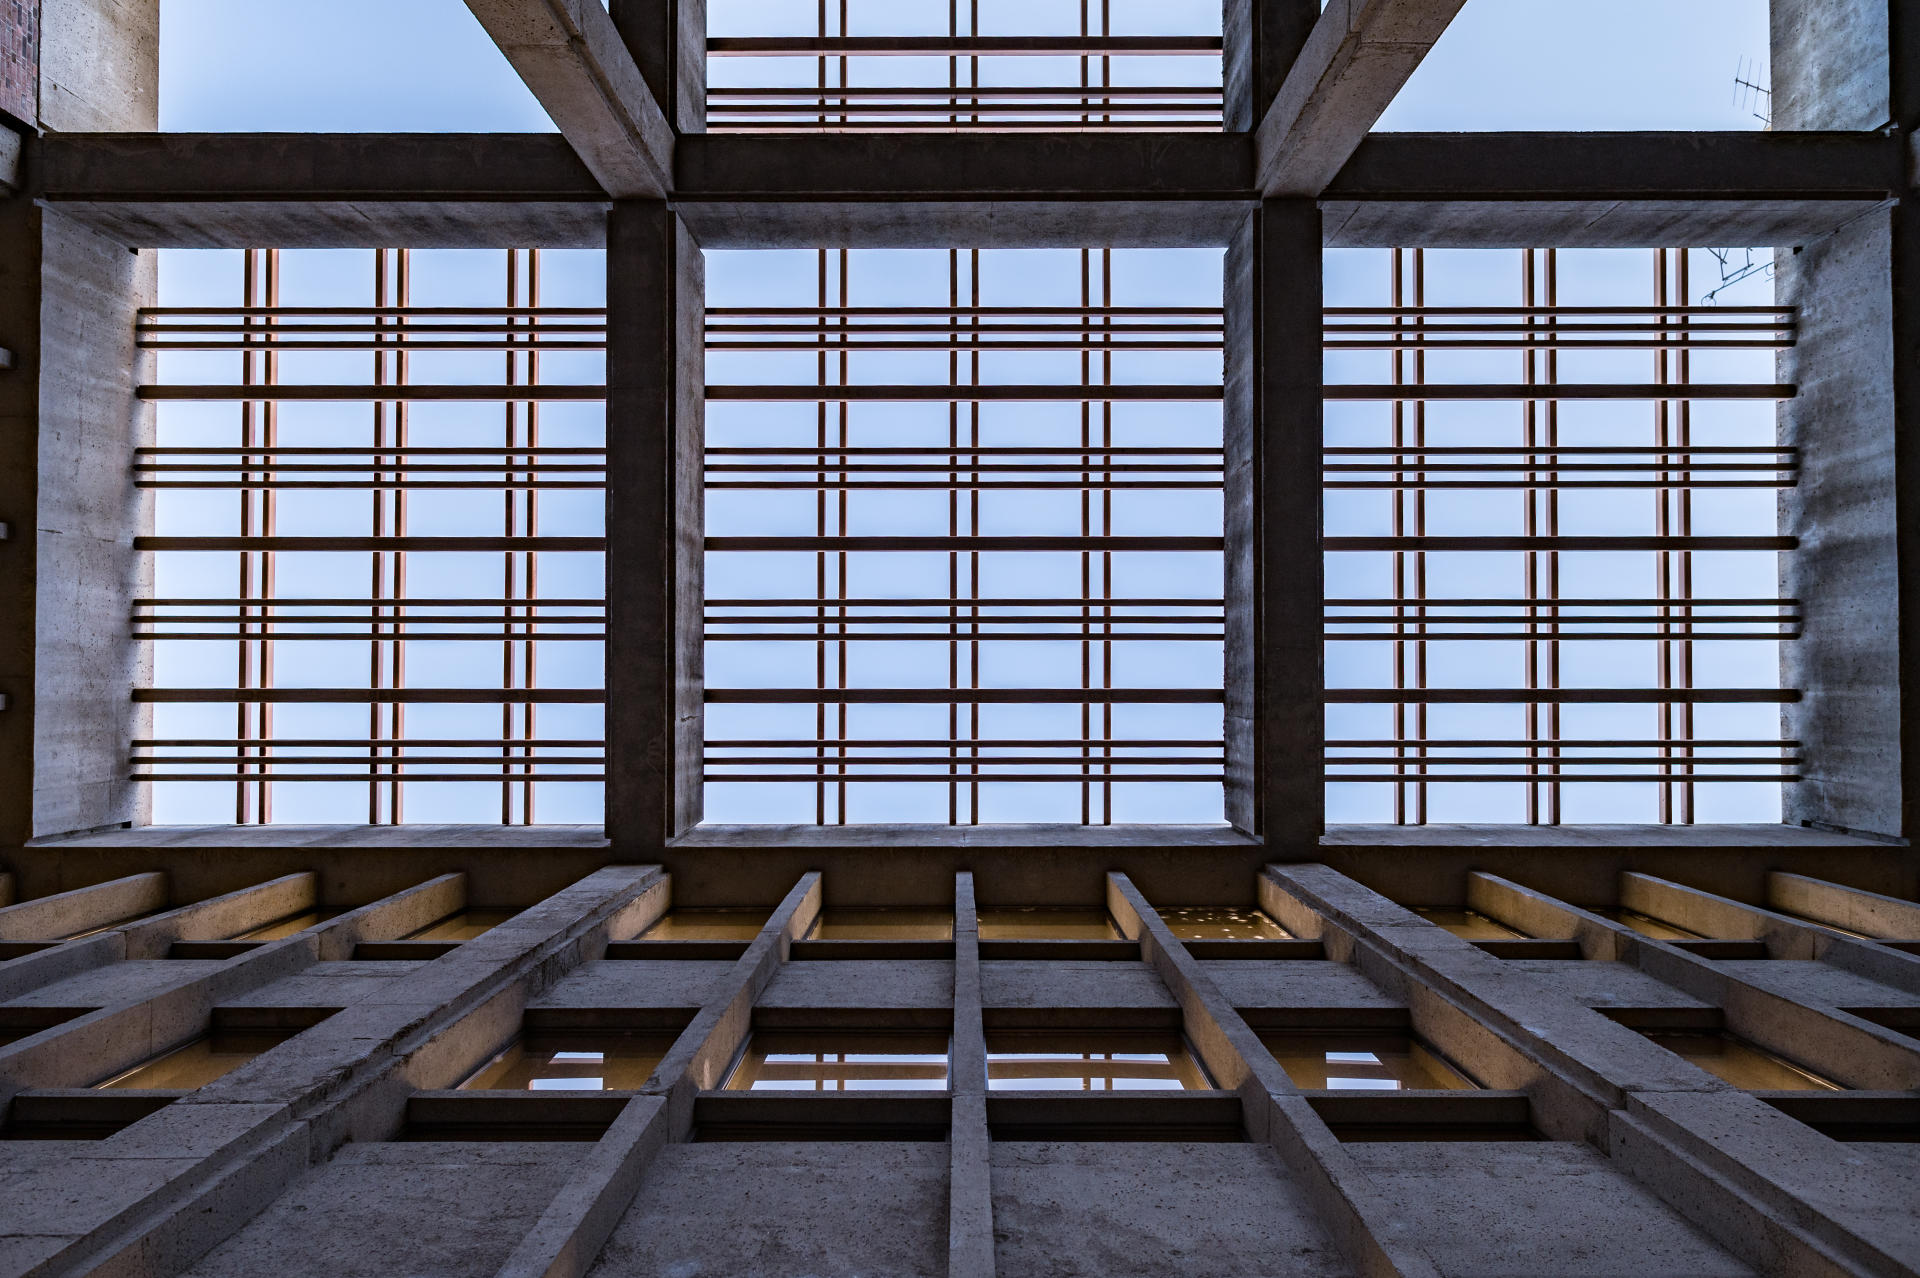 A photo from the ground looking up at intersecting bars beneath a library.